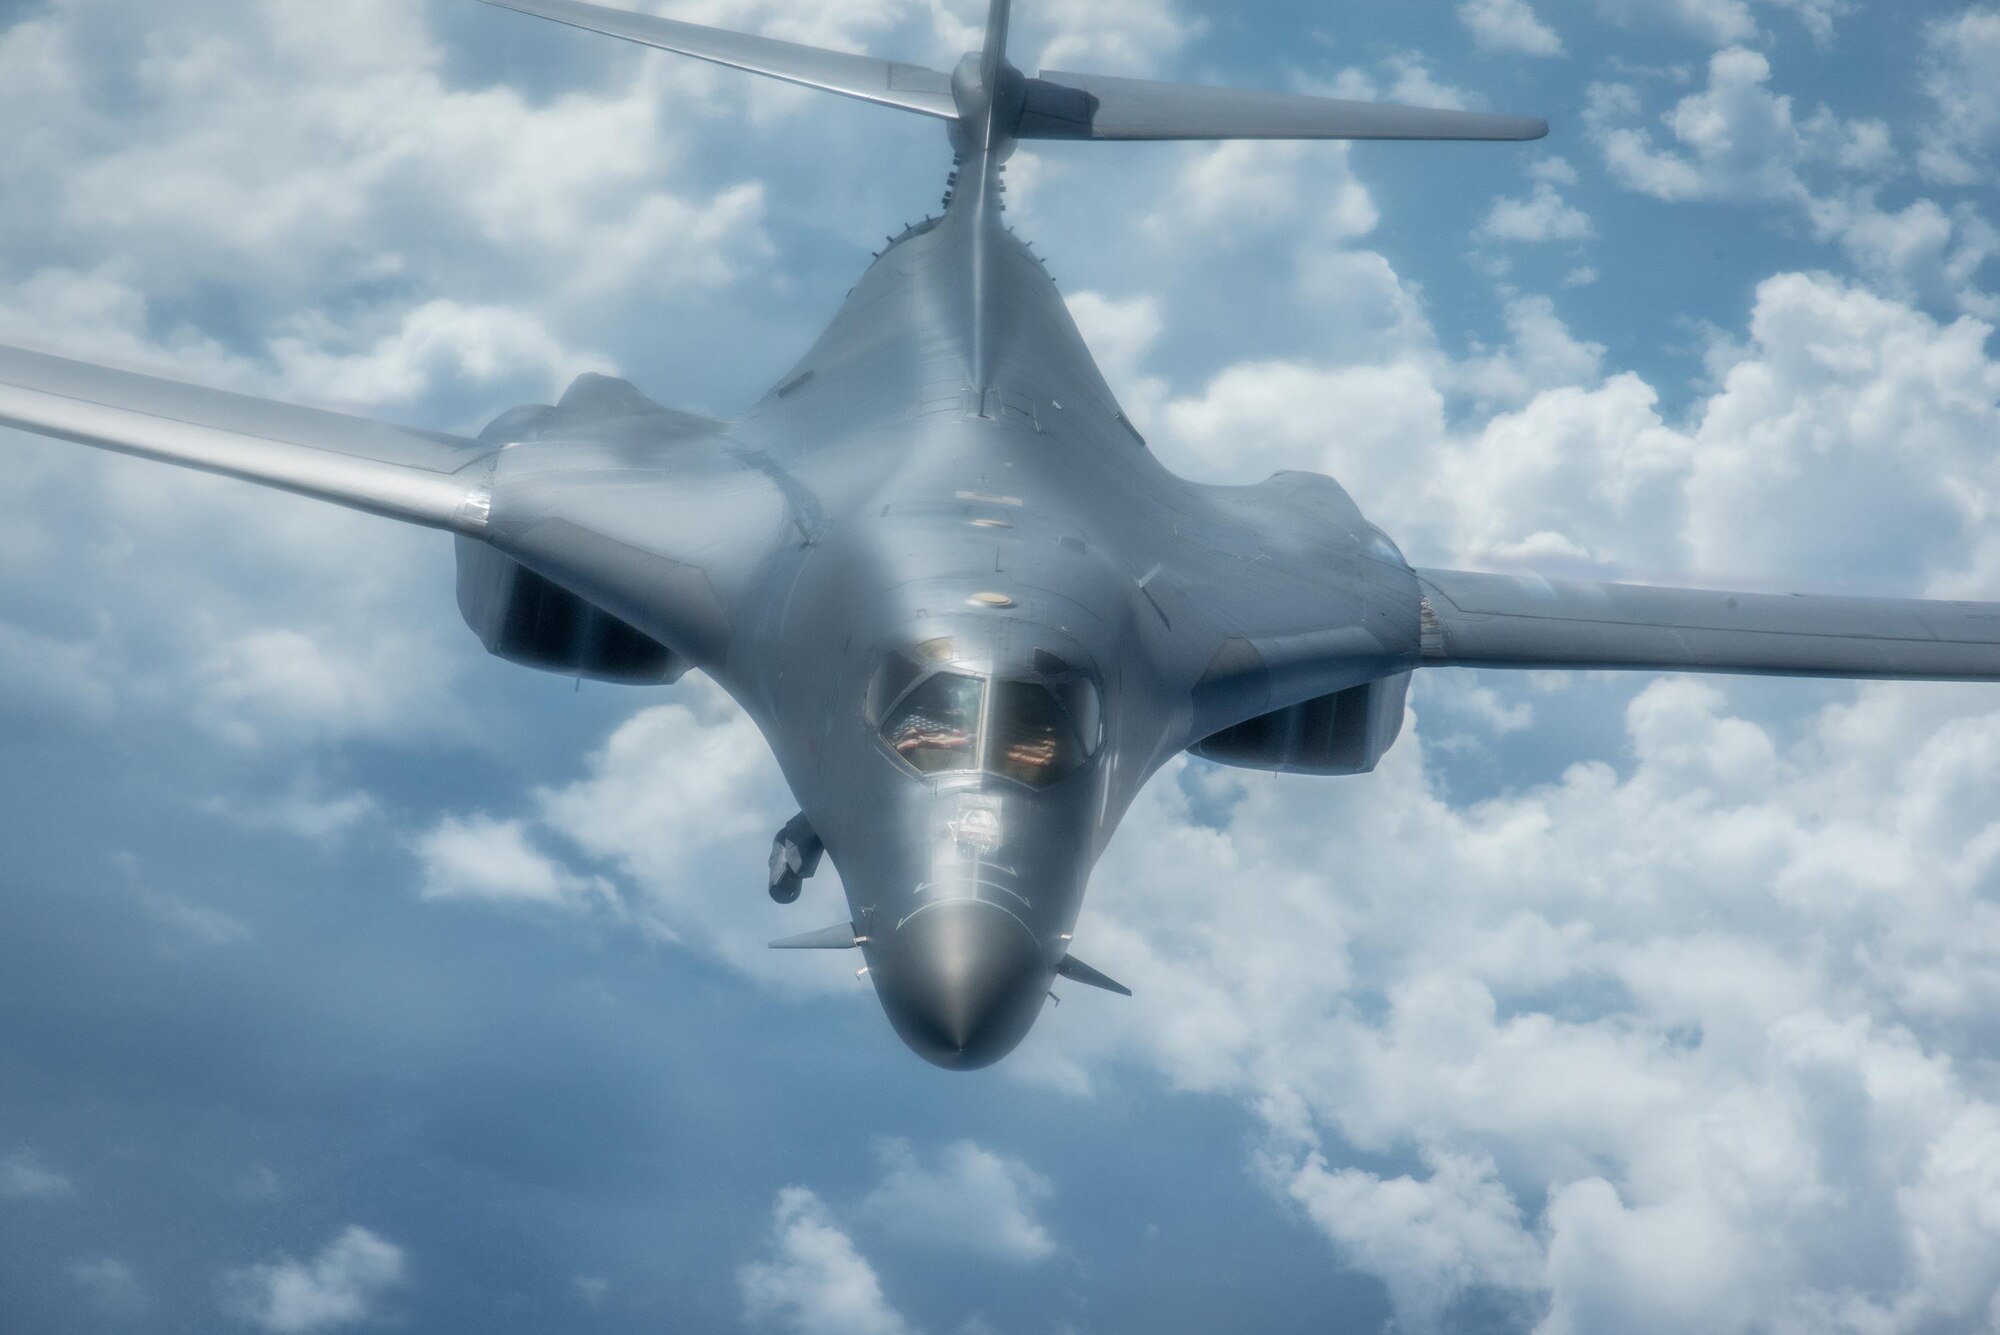 A U.S. Air Force B-1B Lancer assigned to the 9th Expeditionary Bomb Squadron, deployed from Dyess Air Force Base, Texas, flies a 10-hour mission from Andersen Air Force Base, Guam, through the South China Sea, operating with the U.S. Navy's Arleigh Burke-class guided-missile destroyer USS Sterett (DDG 104), June 8, 2017. The joint training, organized under Pacific Command's continuous bomber presence program (CBP), allows the Air Force and Navy to increase interoperability by refining joint tactics, techniques and procedures while simultaneously strengthening their ability to seamlessly integrate their operations. (U.S. Air Force photo/Staff Sgt. Joshua Smoot)